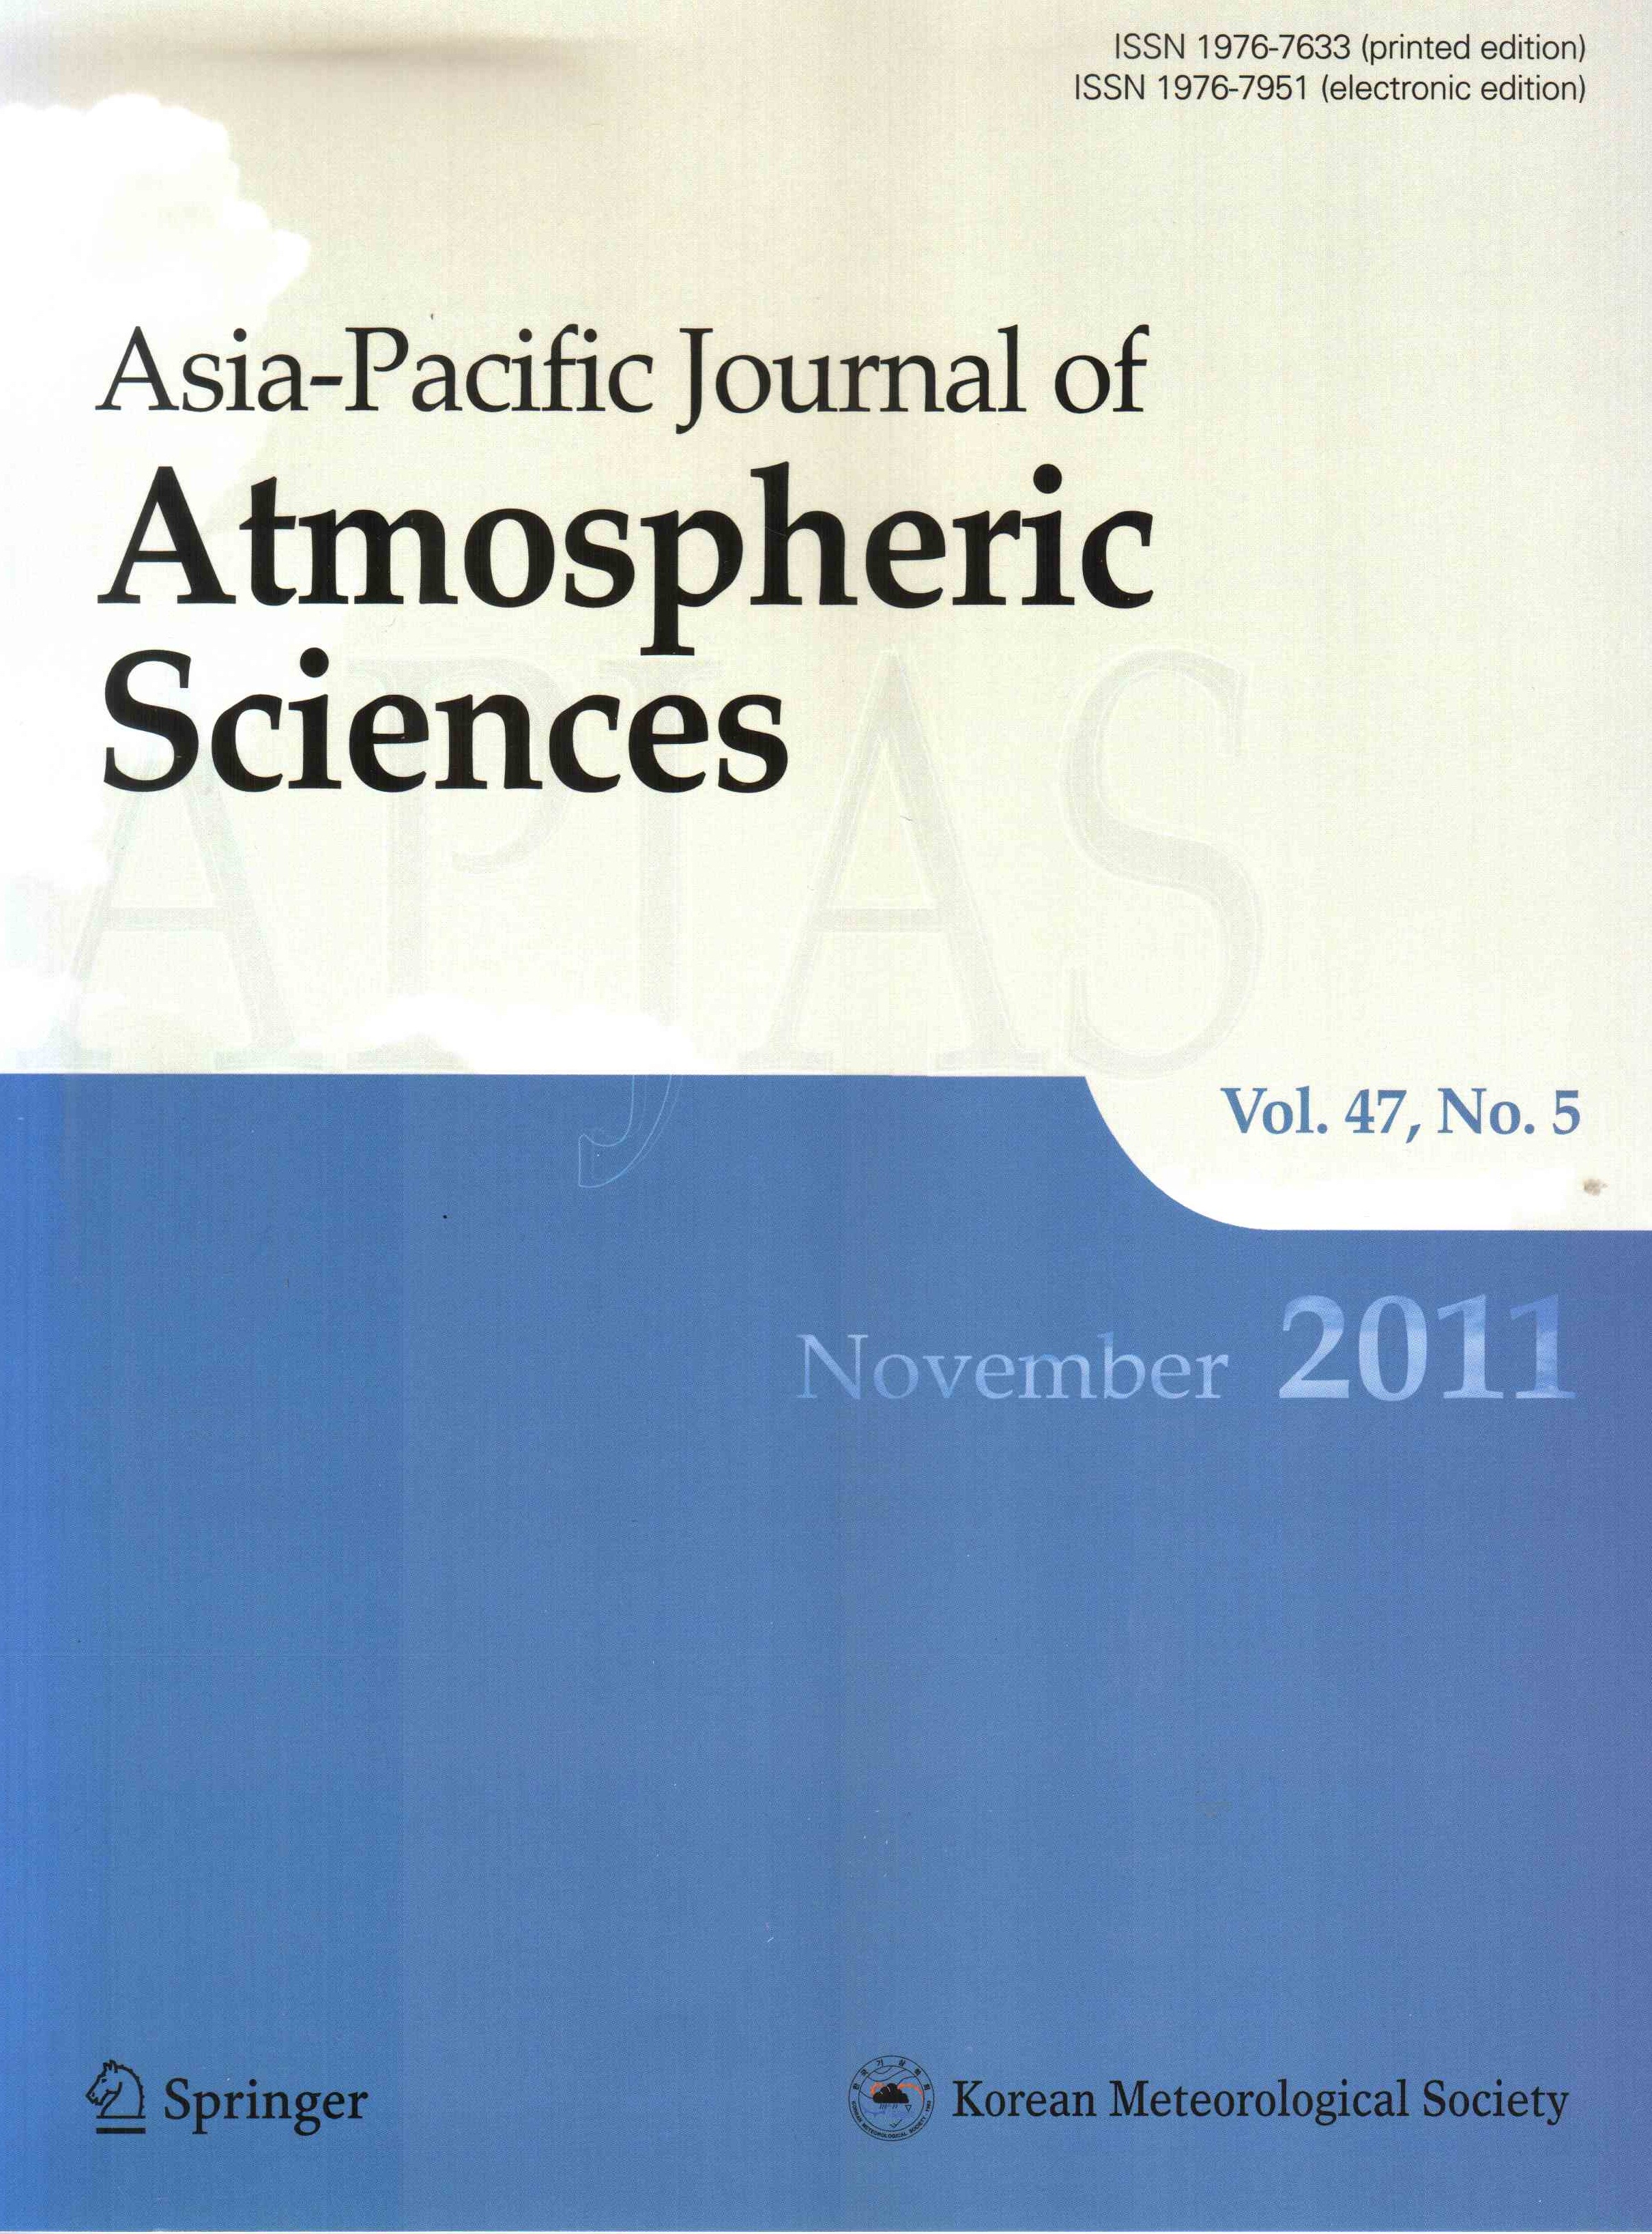 Asian pacific journal of public health